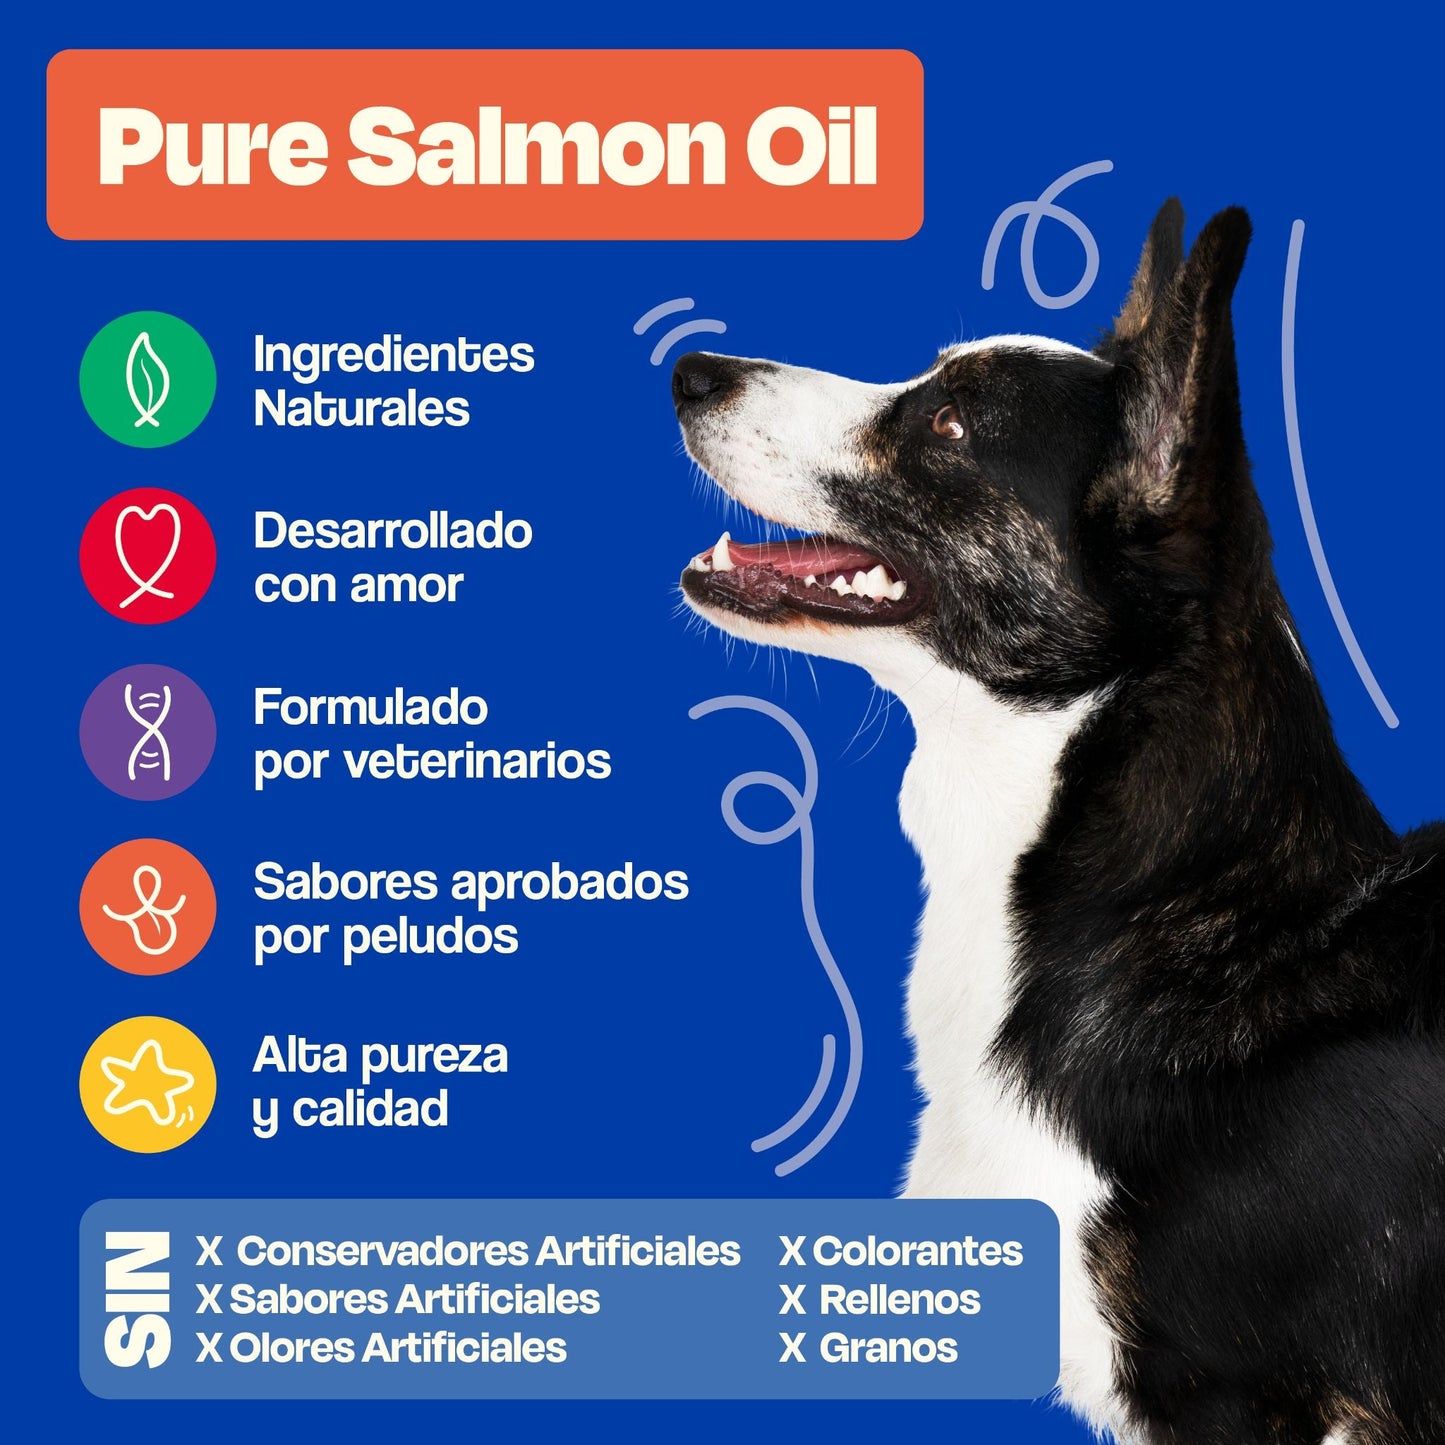 Pure Salmon Oil - Dogelthy